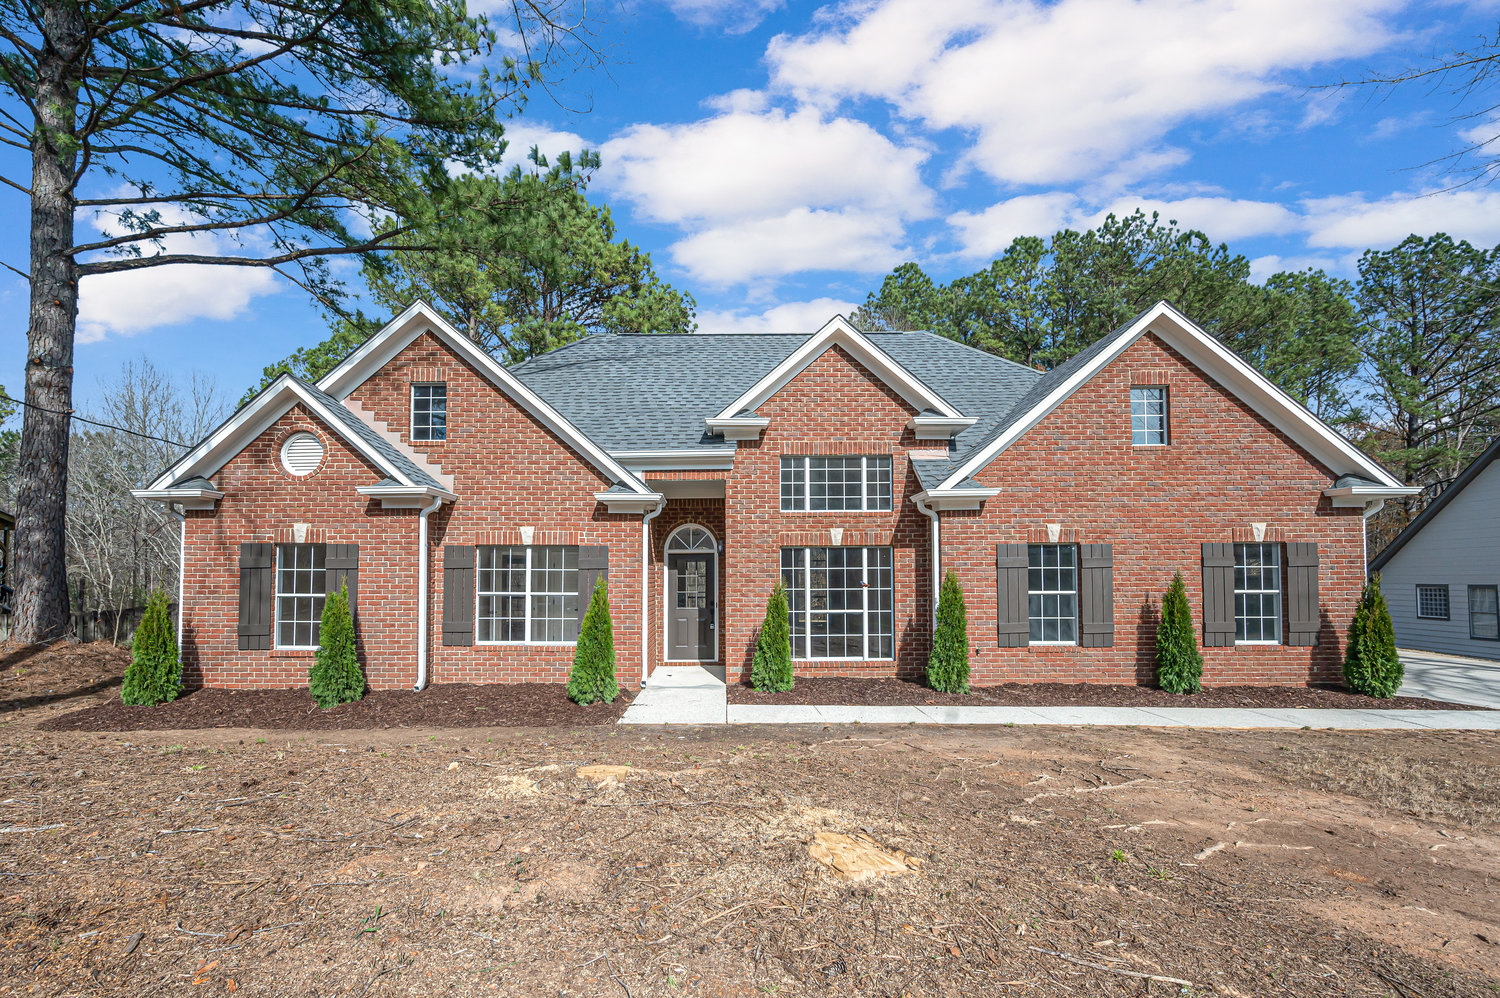 Virtual Tour of Birmingham Metro Real Estate Listing For Sale | 651 Shelby Forest Trail, Chelsea, AL 35043